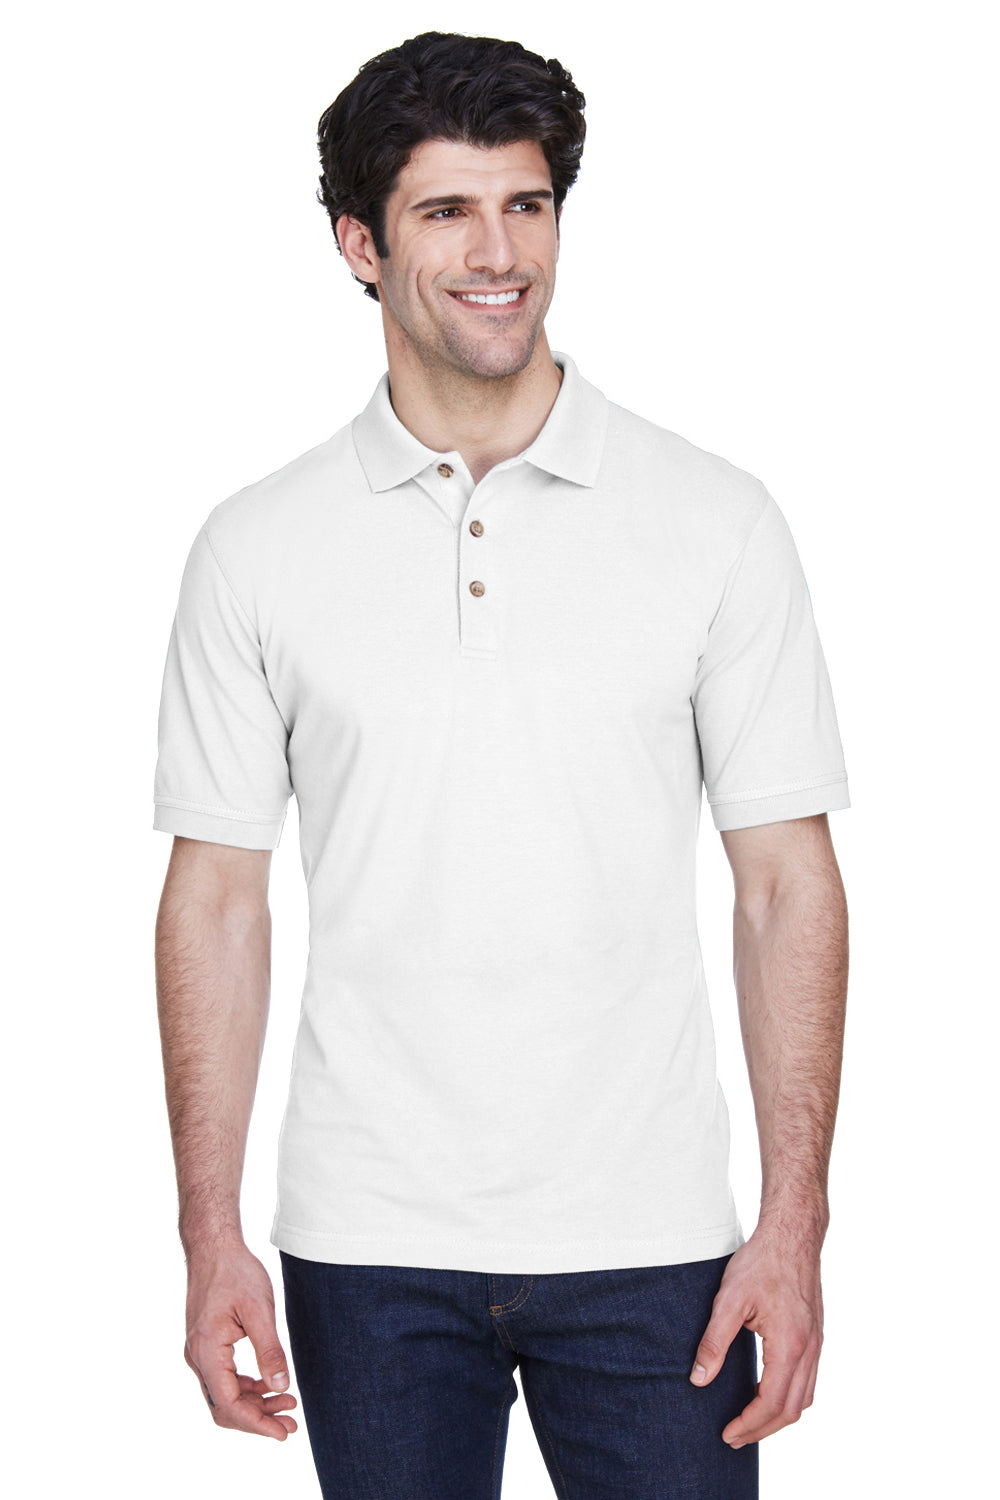 UltraClub 8535 Mens Classic Short Sleeve Polo Shirt White Front